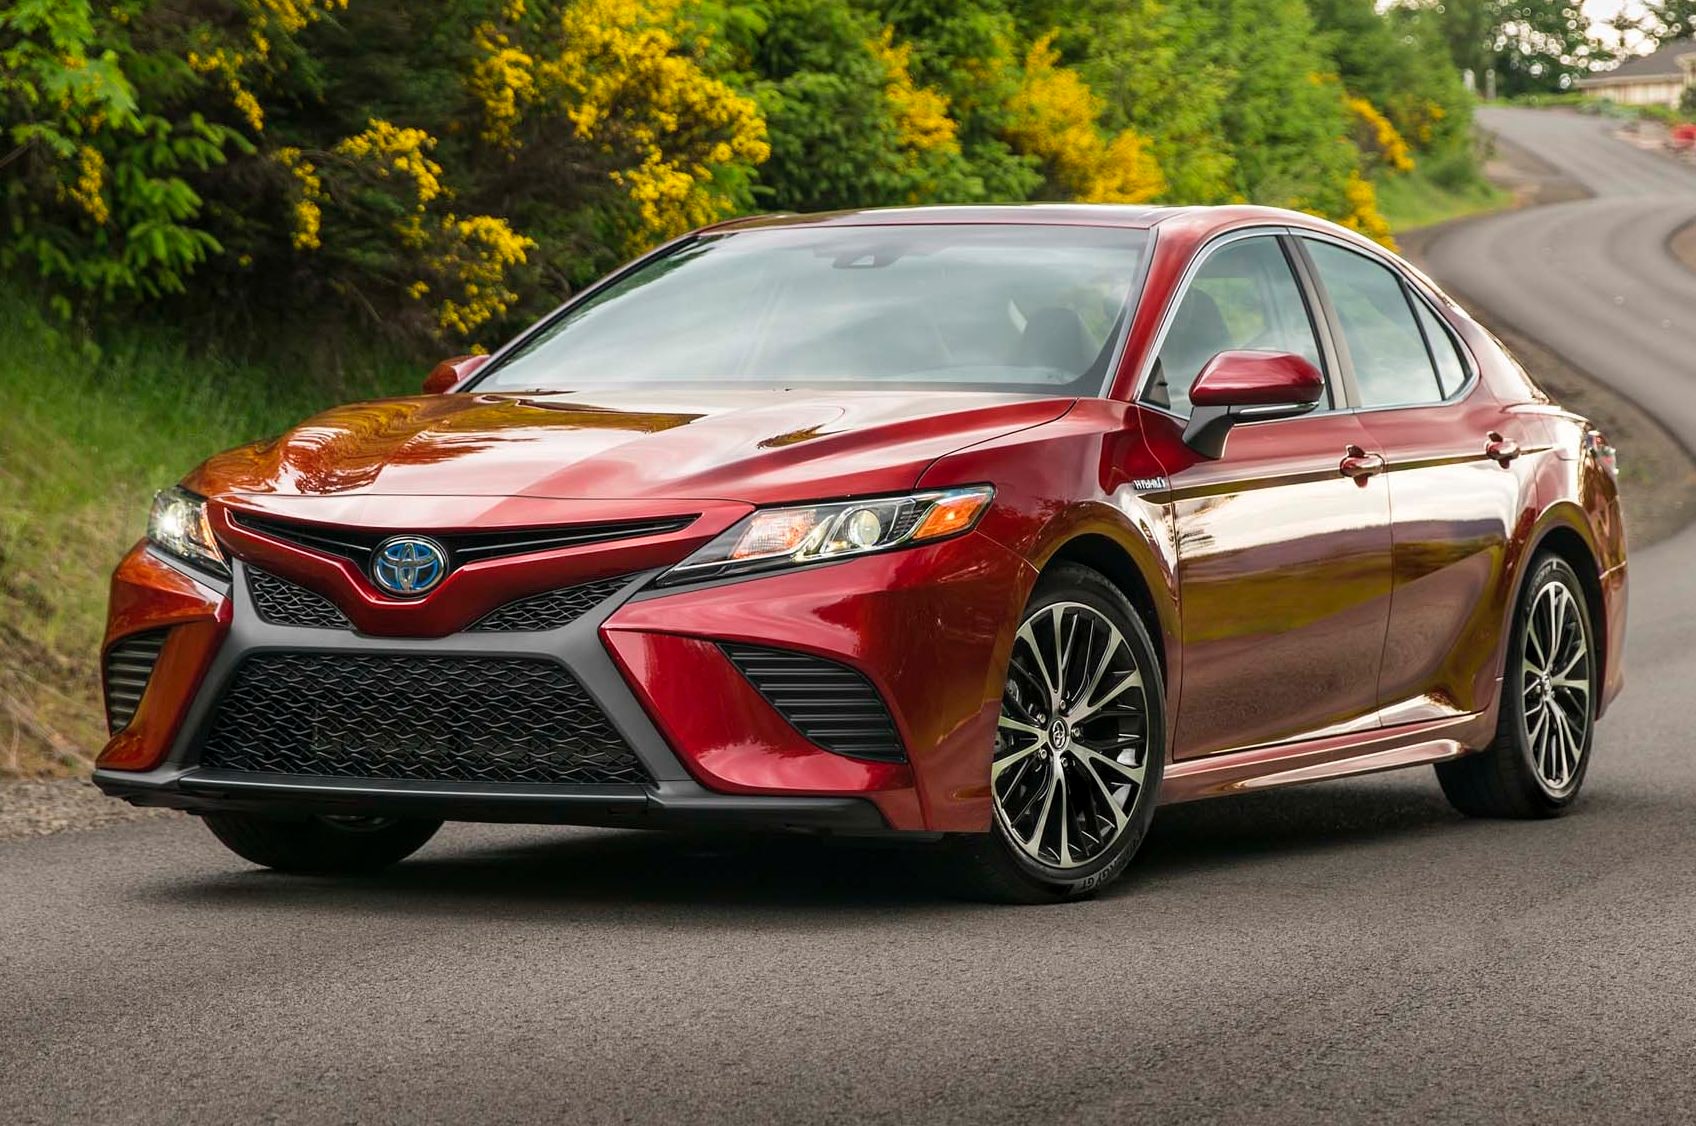 2018 Toyota Camry First Drive Review: Boldly Going...